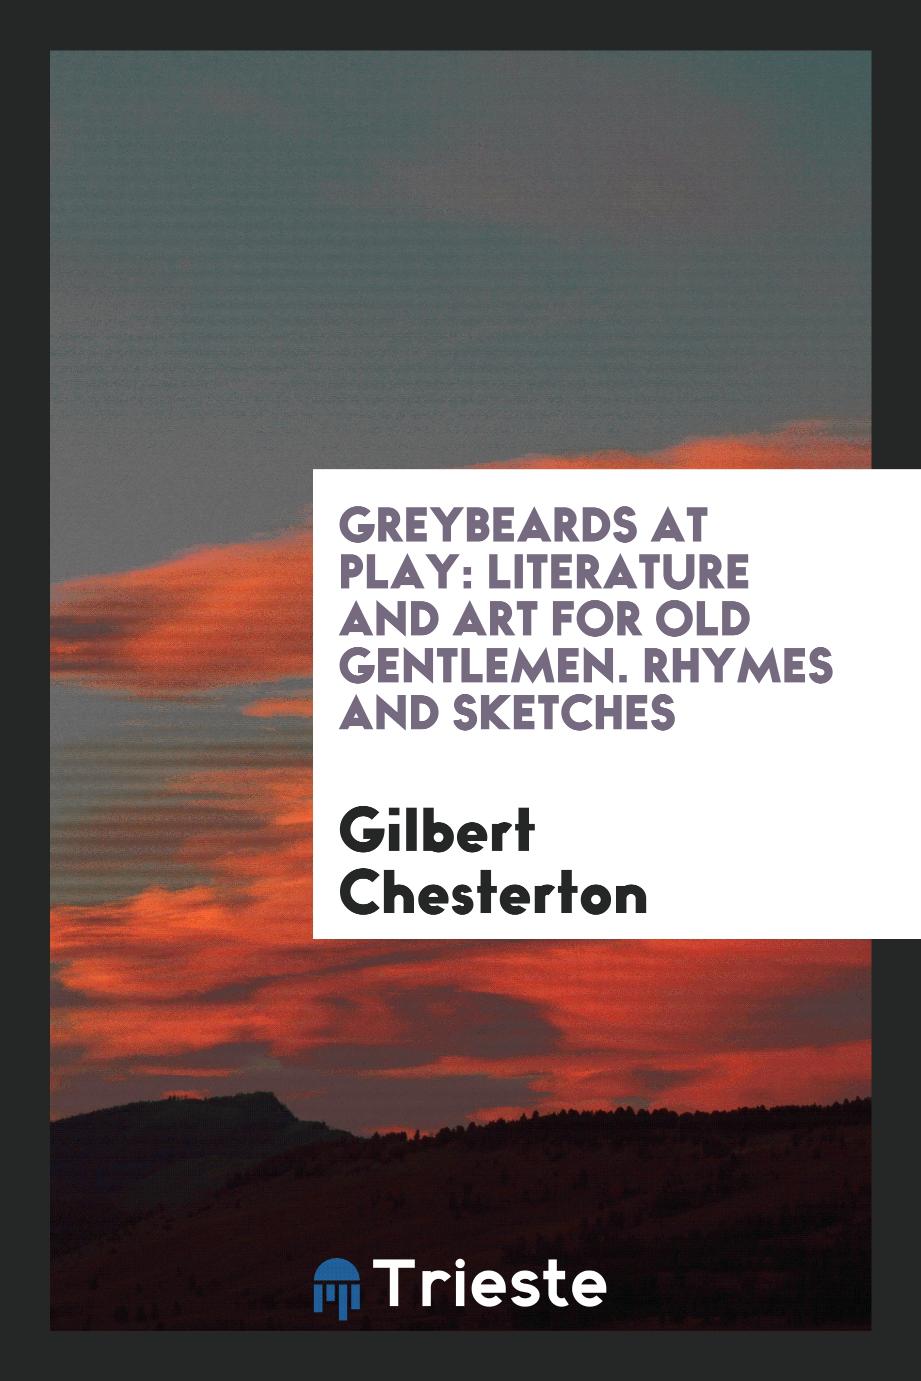 Greybeards at Play: Literature and Art for Old Gentlemen. Rhymes and Sketches